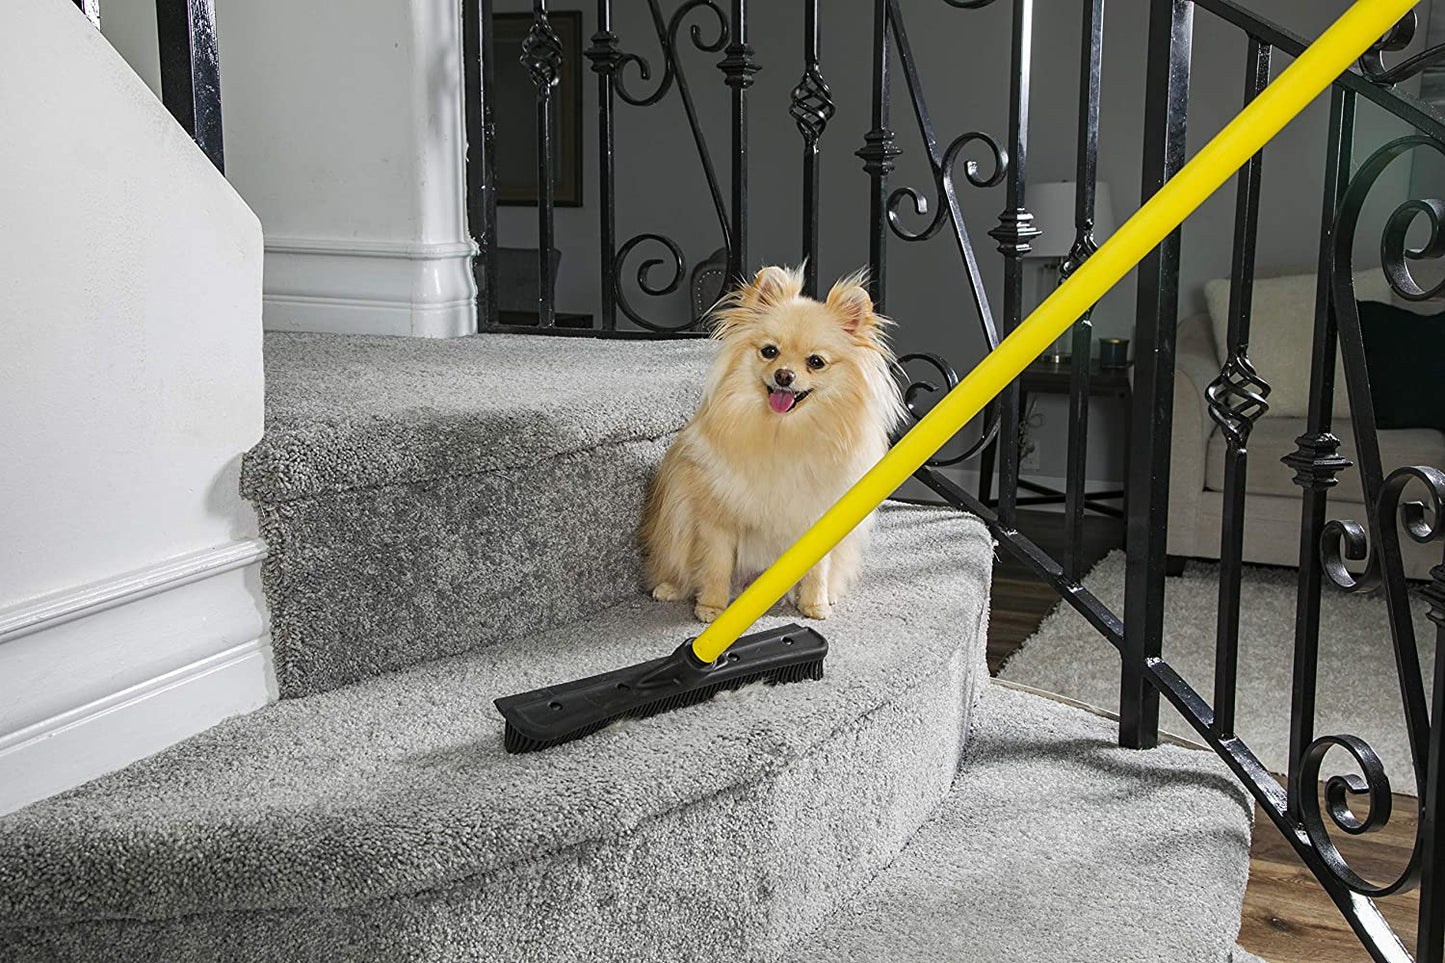 FURemover Pet Hair Remover Carpet Rake - Rubber Broom for Pet Hair Removal Tool with Squeegee & Telescoping Handle Extends from 3-5' Black & Yellow